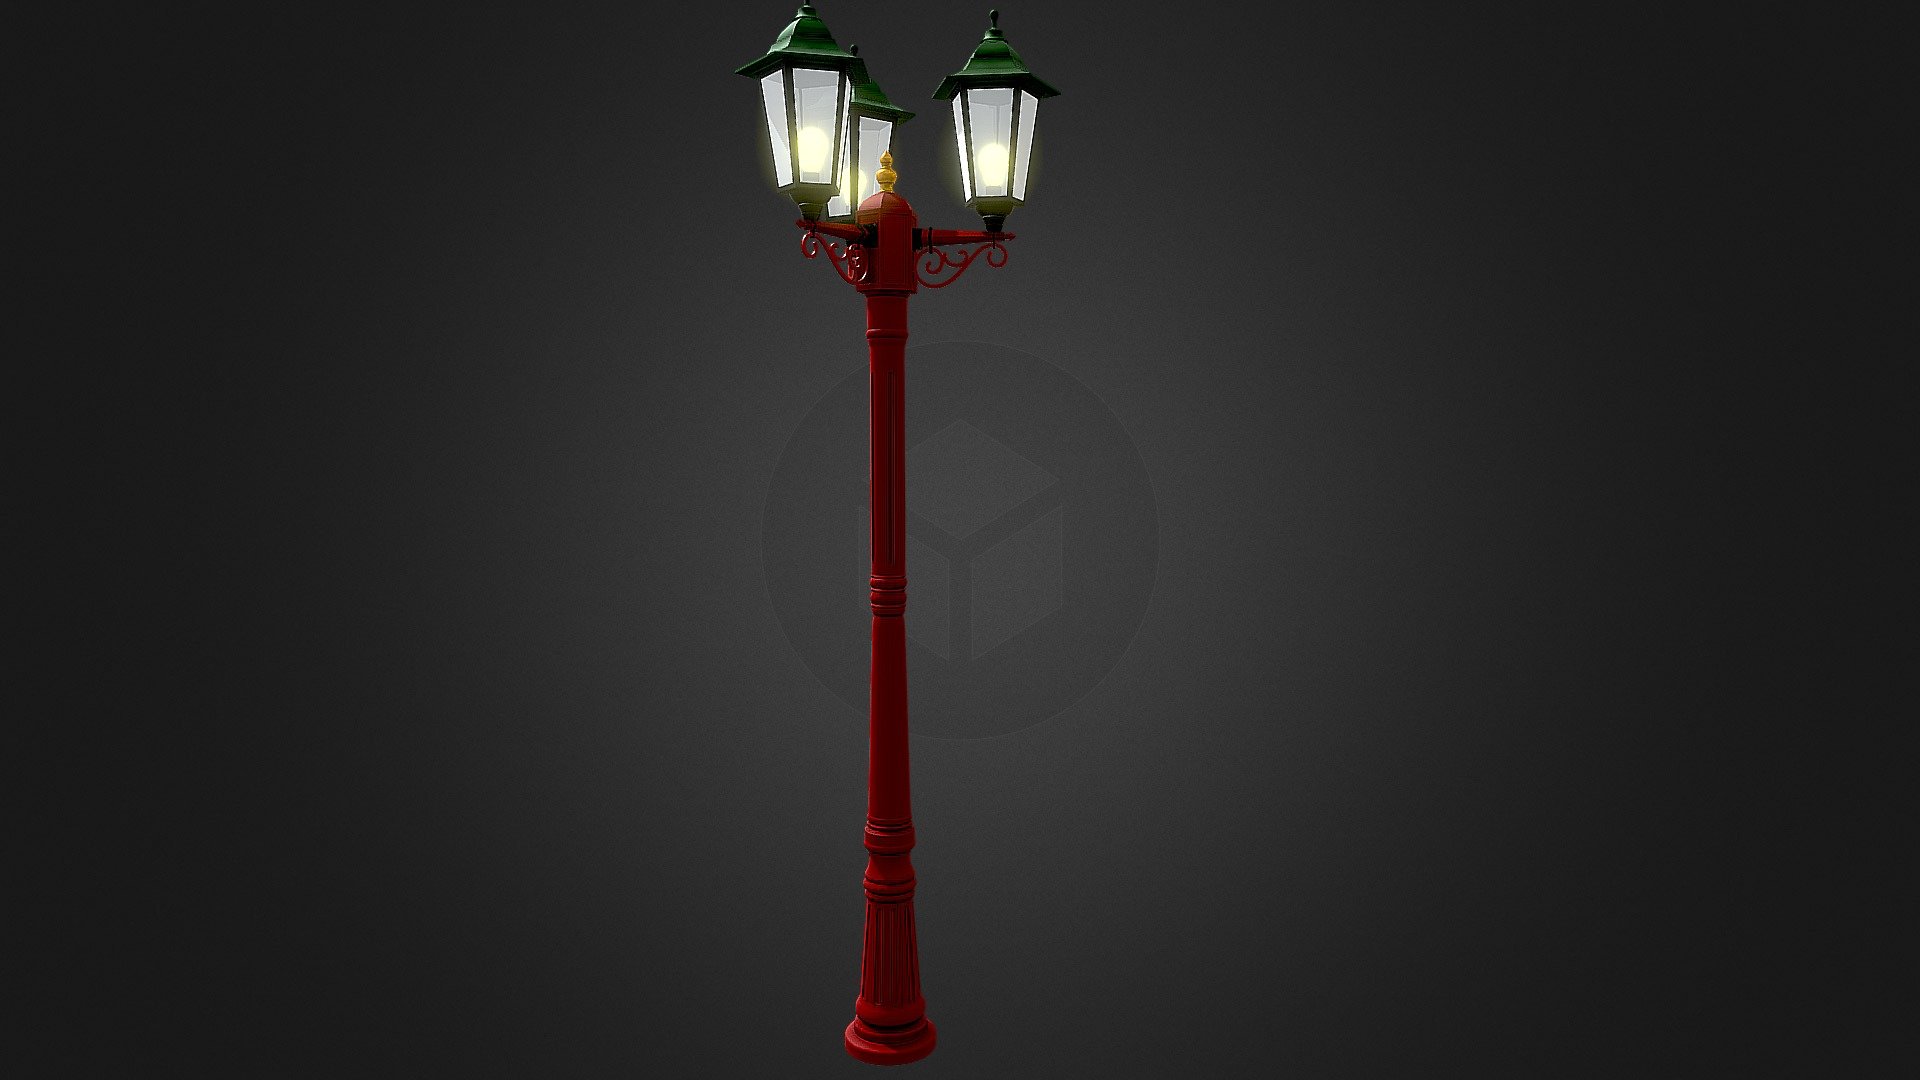 3D model of a pole light can be used in city/street scene or in your VFX productions - Street light 05 - Buy Royalty Free 3D model by Ares Studio (@aresstudio) 3d model